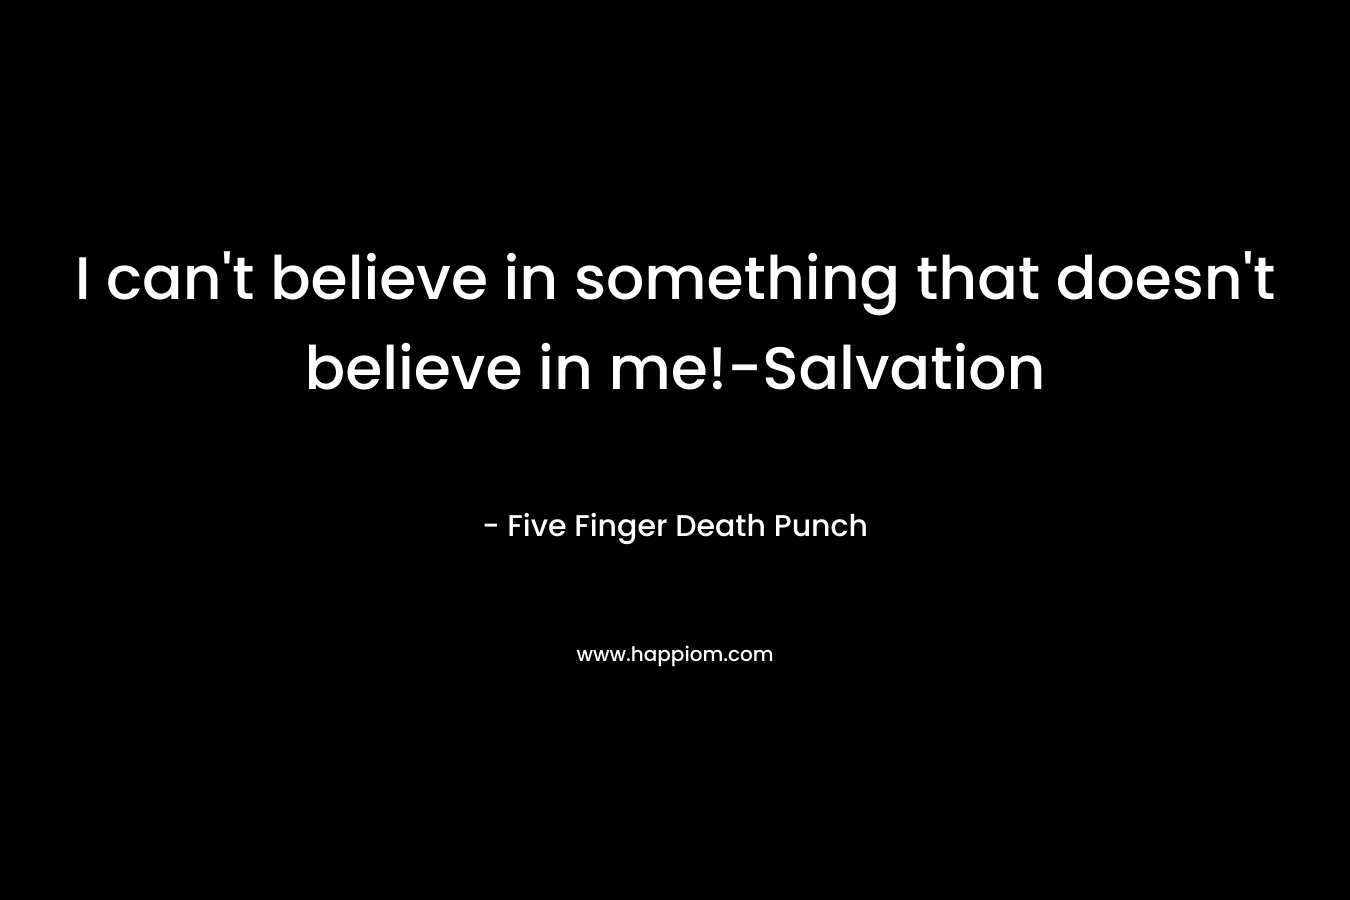 I can't believe in something that doesn't believe in me!-Salvation